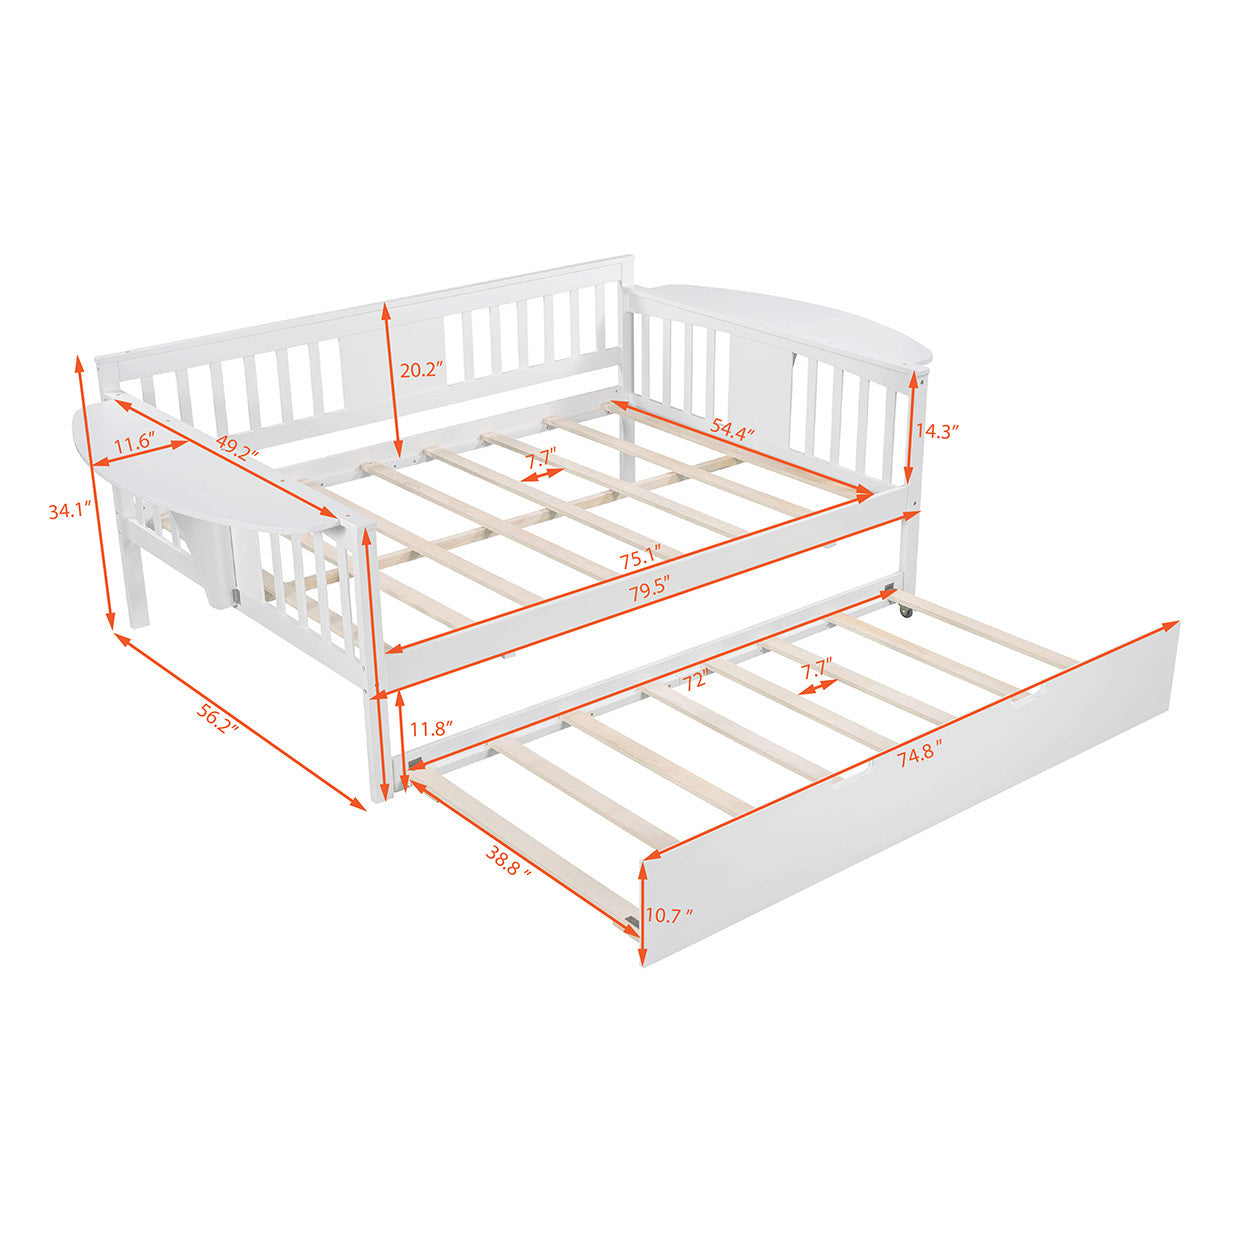 Full size Daybed with Twin size Trundle, Wood Slat Support, White